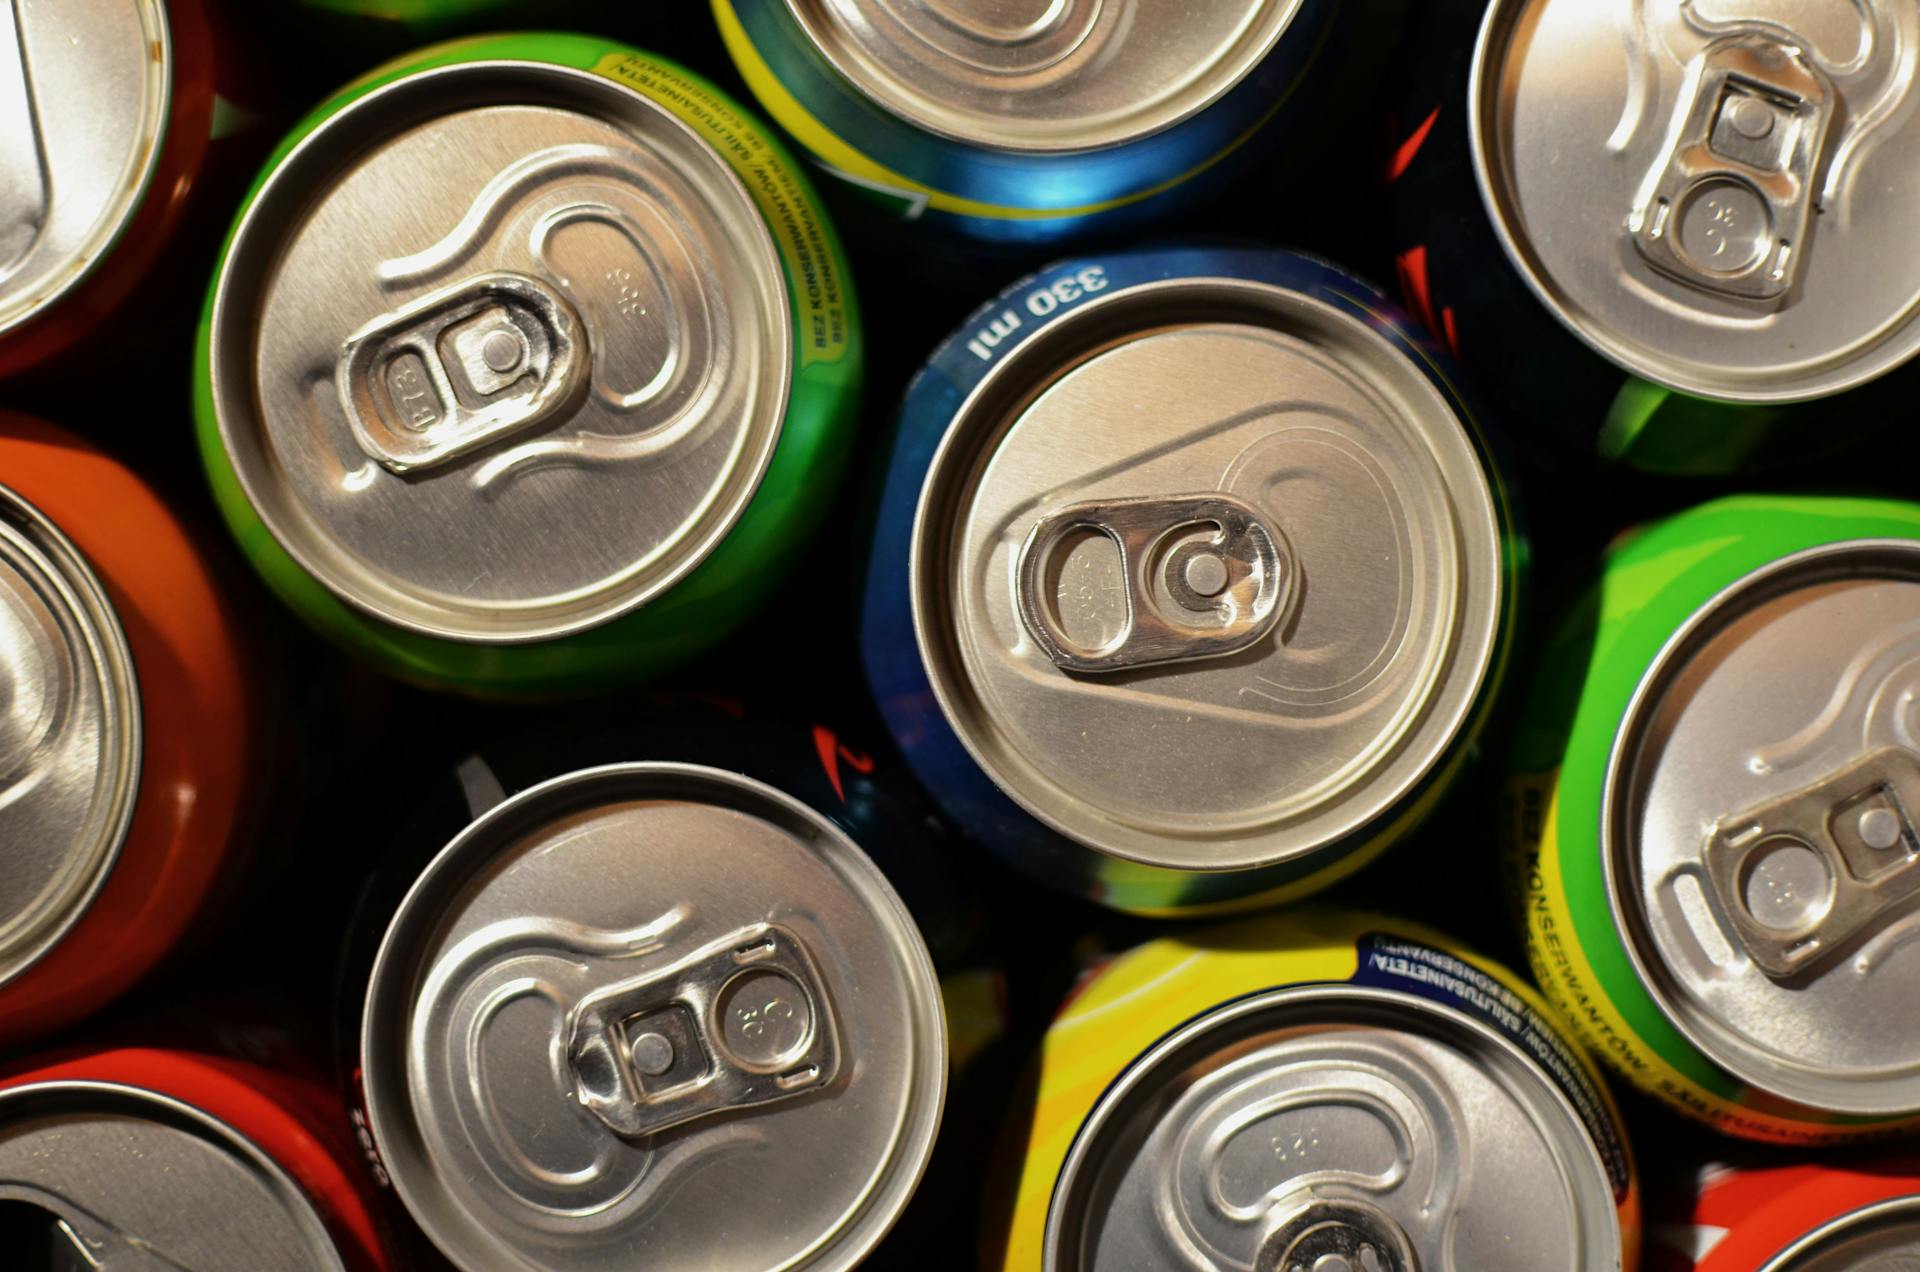 soft drinks in cans seen from above